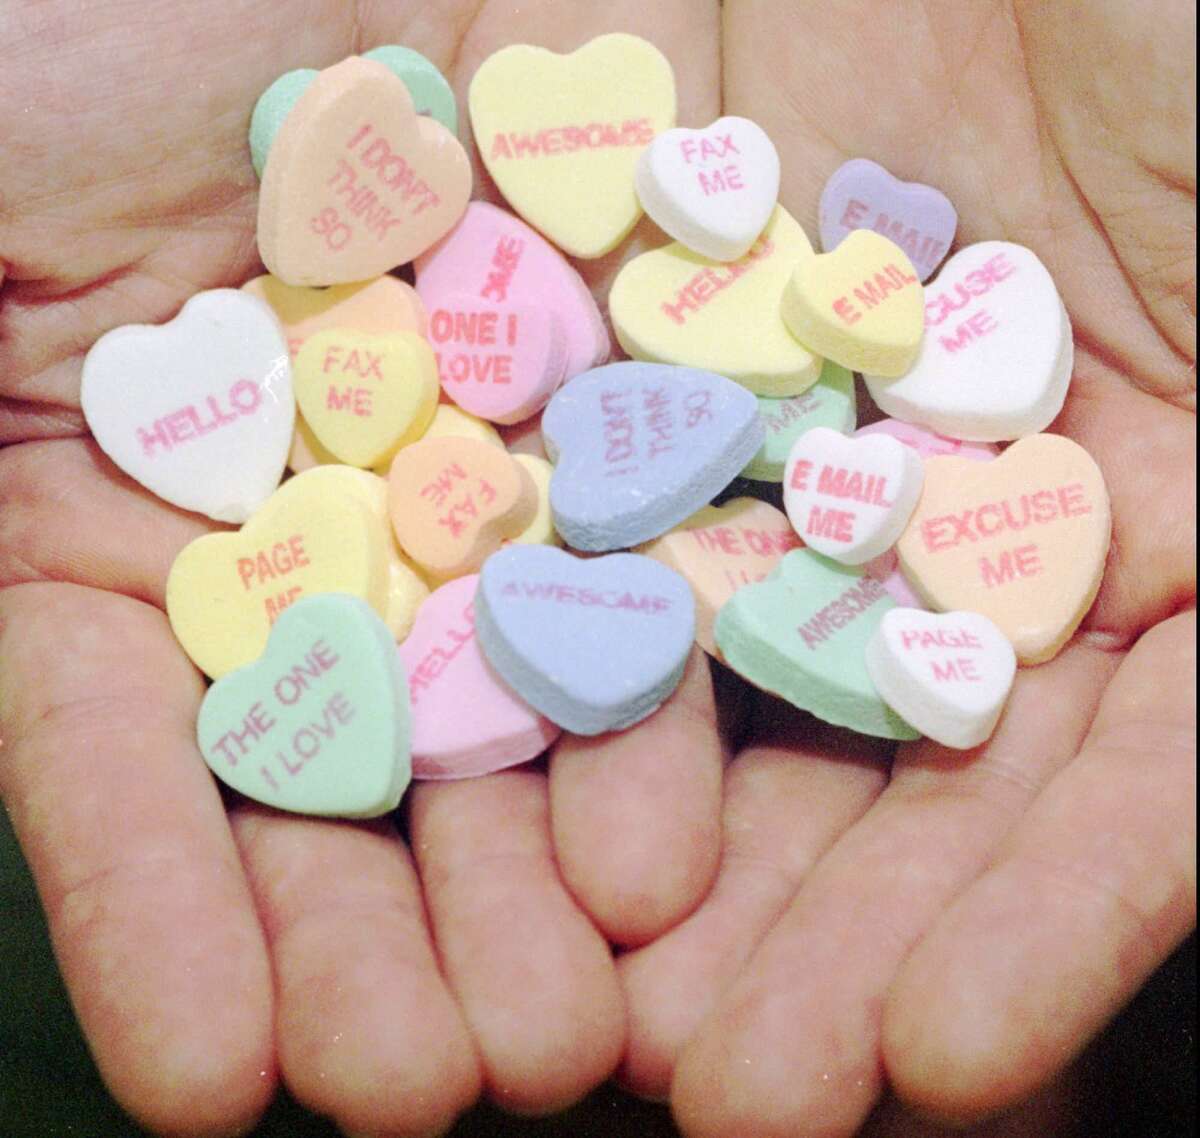 Conversation Hearts Aren't Being Sold This Year, Here's Why